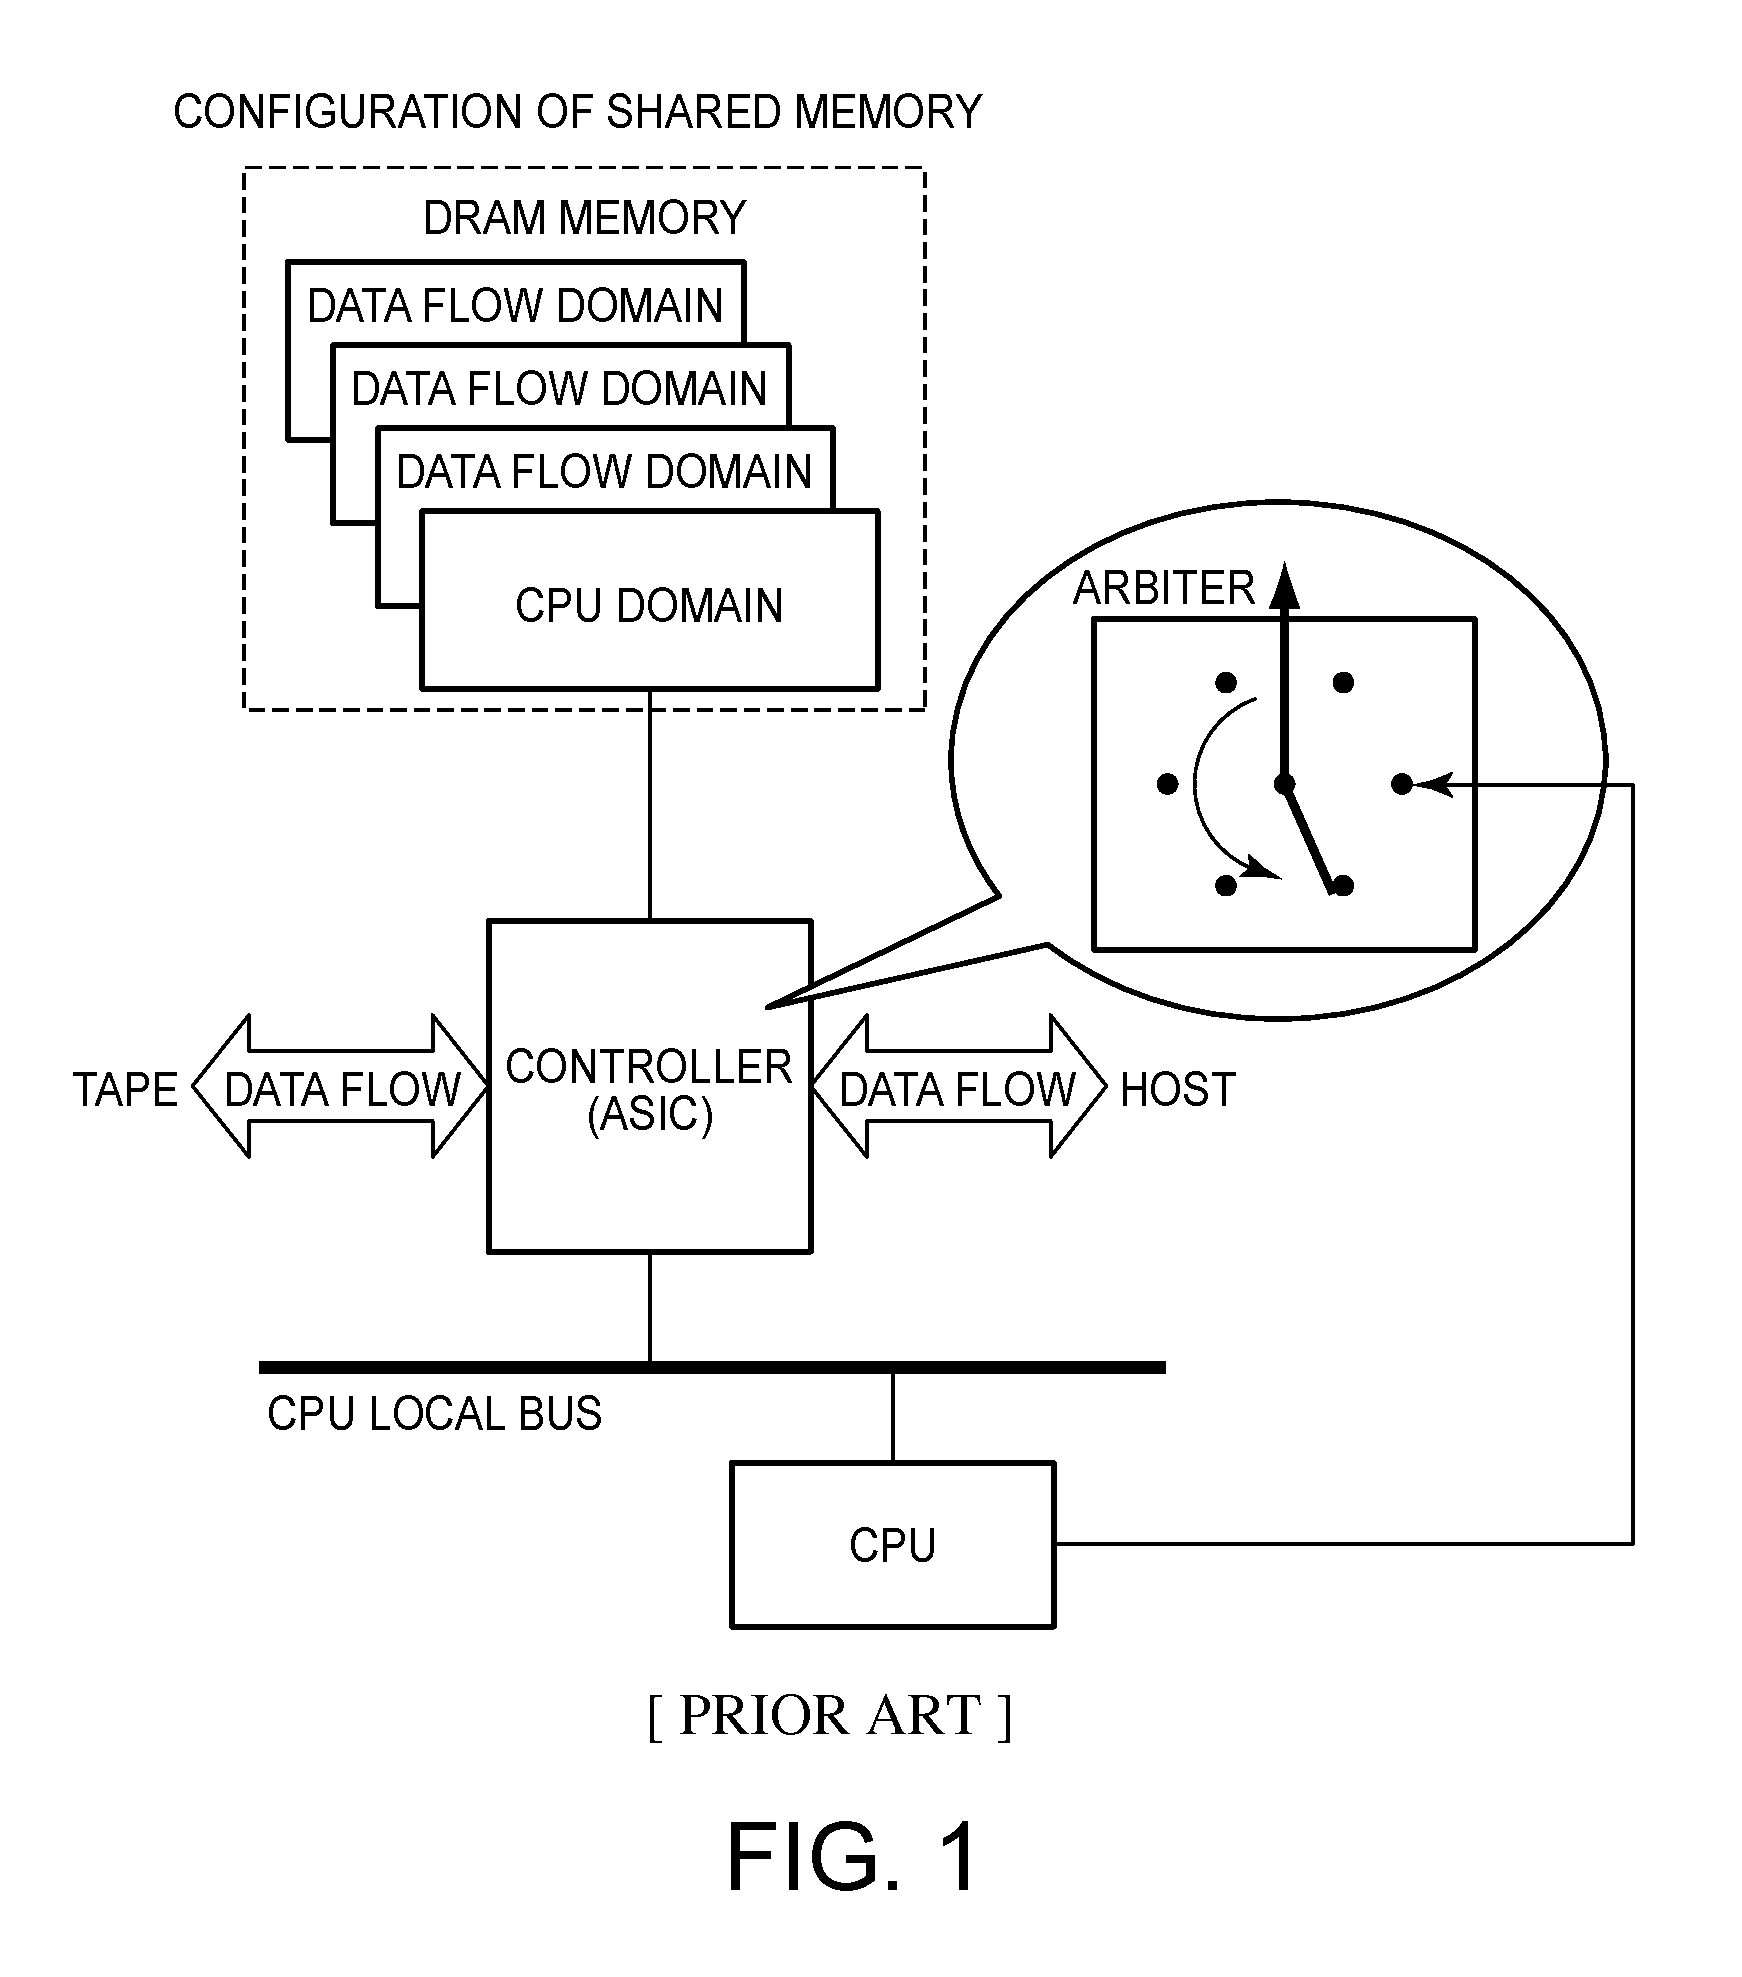 Holding by a memory controller multiple central processing unit memory access requests, and performing the multiple central processing unit memory requests in one transfer cycle